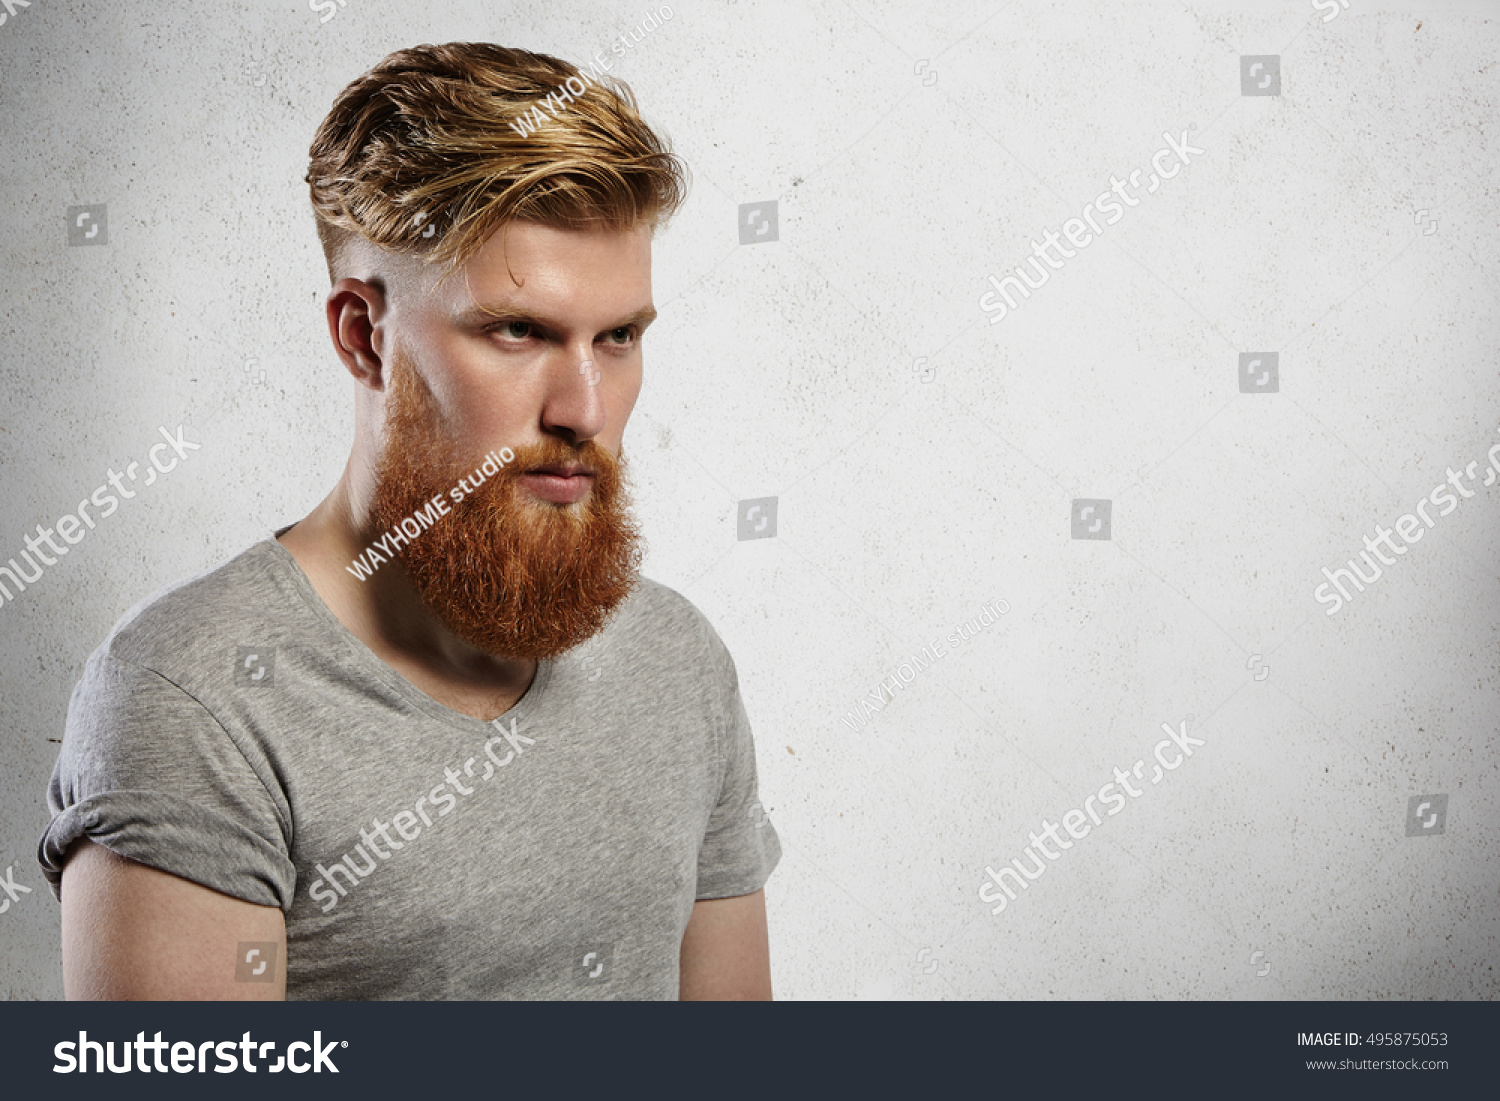 Portrait of courageous and fashionable male model with long trendy beard and undercut hairstyle. Caucasian blond man in grey T-shirt looking sullenly ahead of him. Indoors shot on white background. #495875053